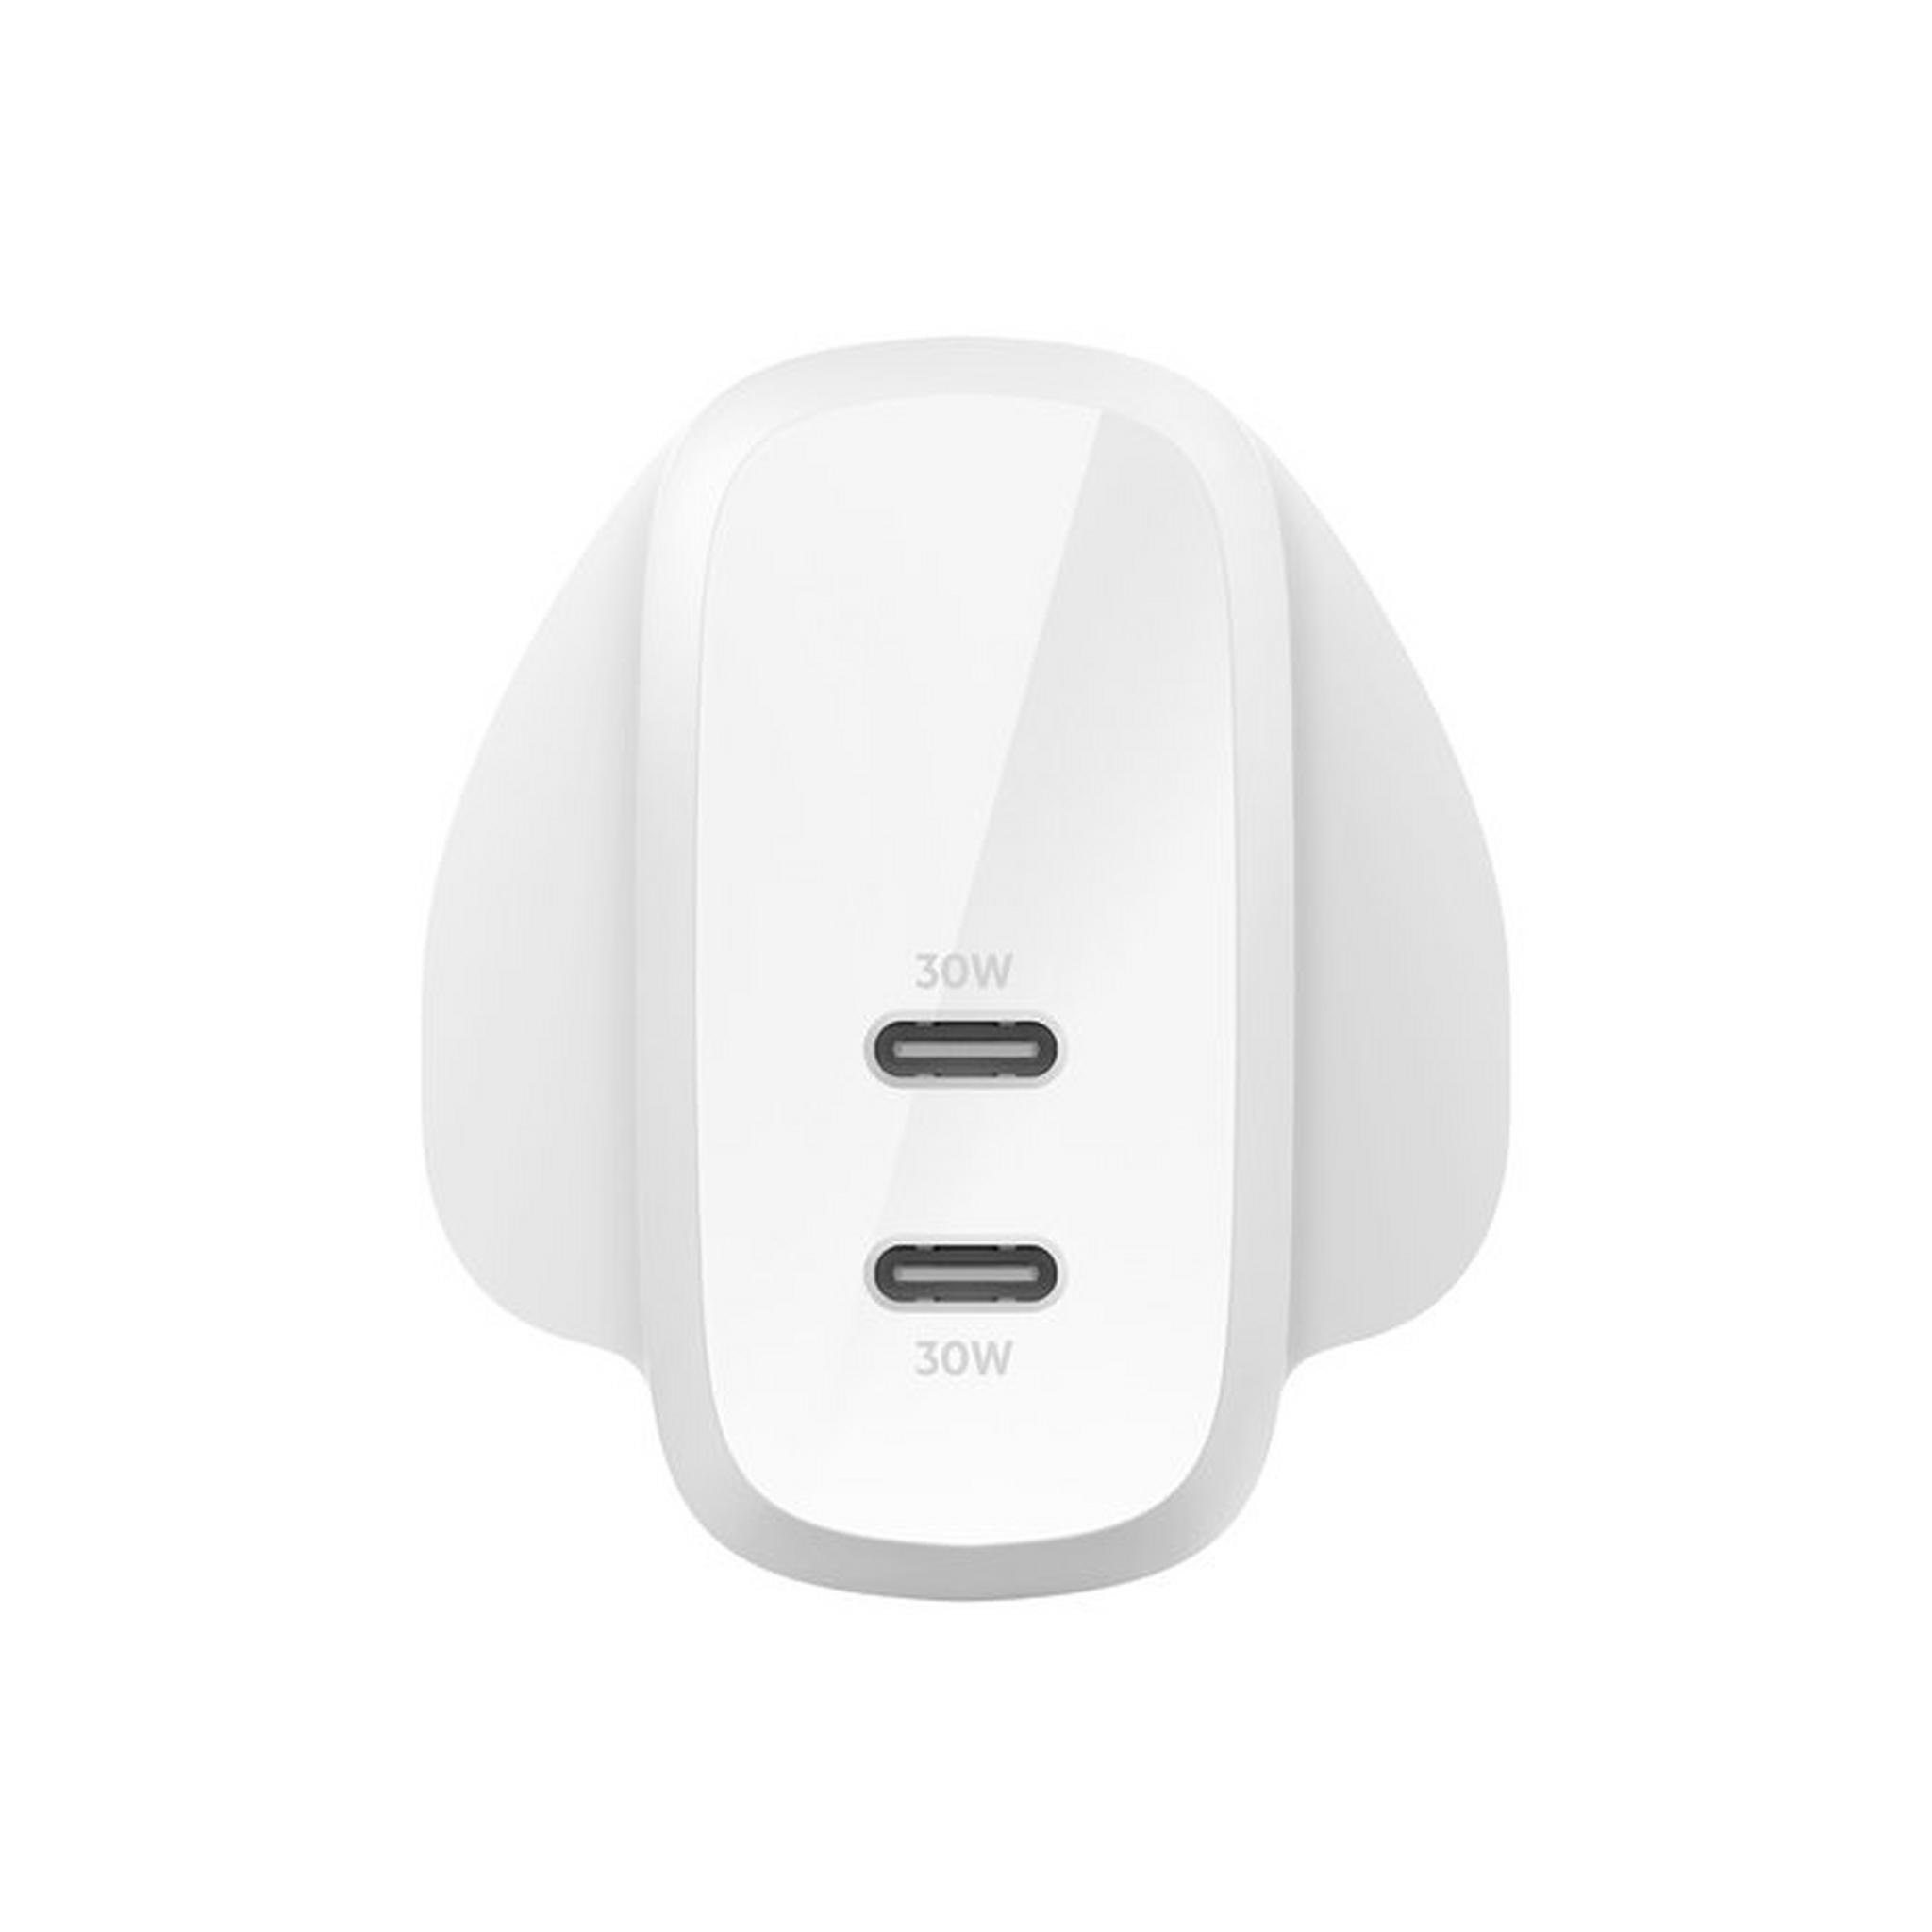 Belkin BoostCharge Pro Dual Port USB-C Wall Charger, WCB010MYWH – White